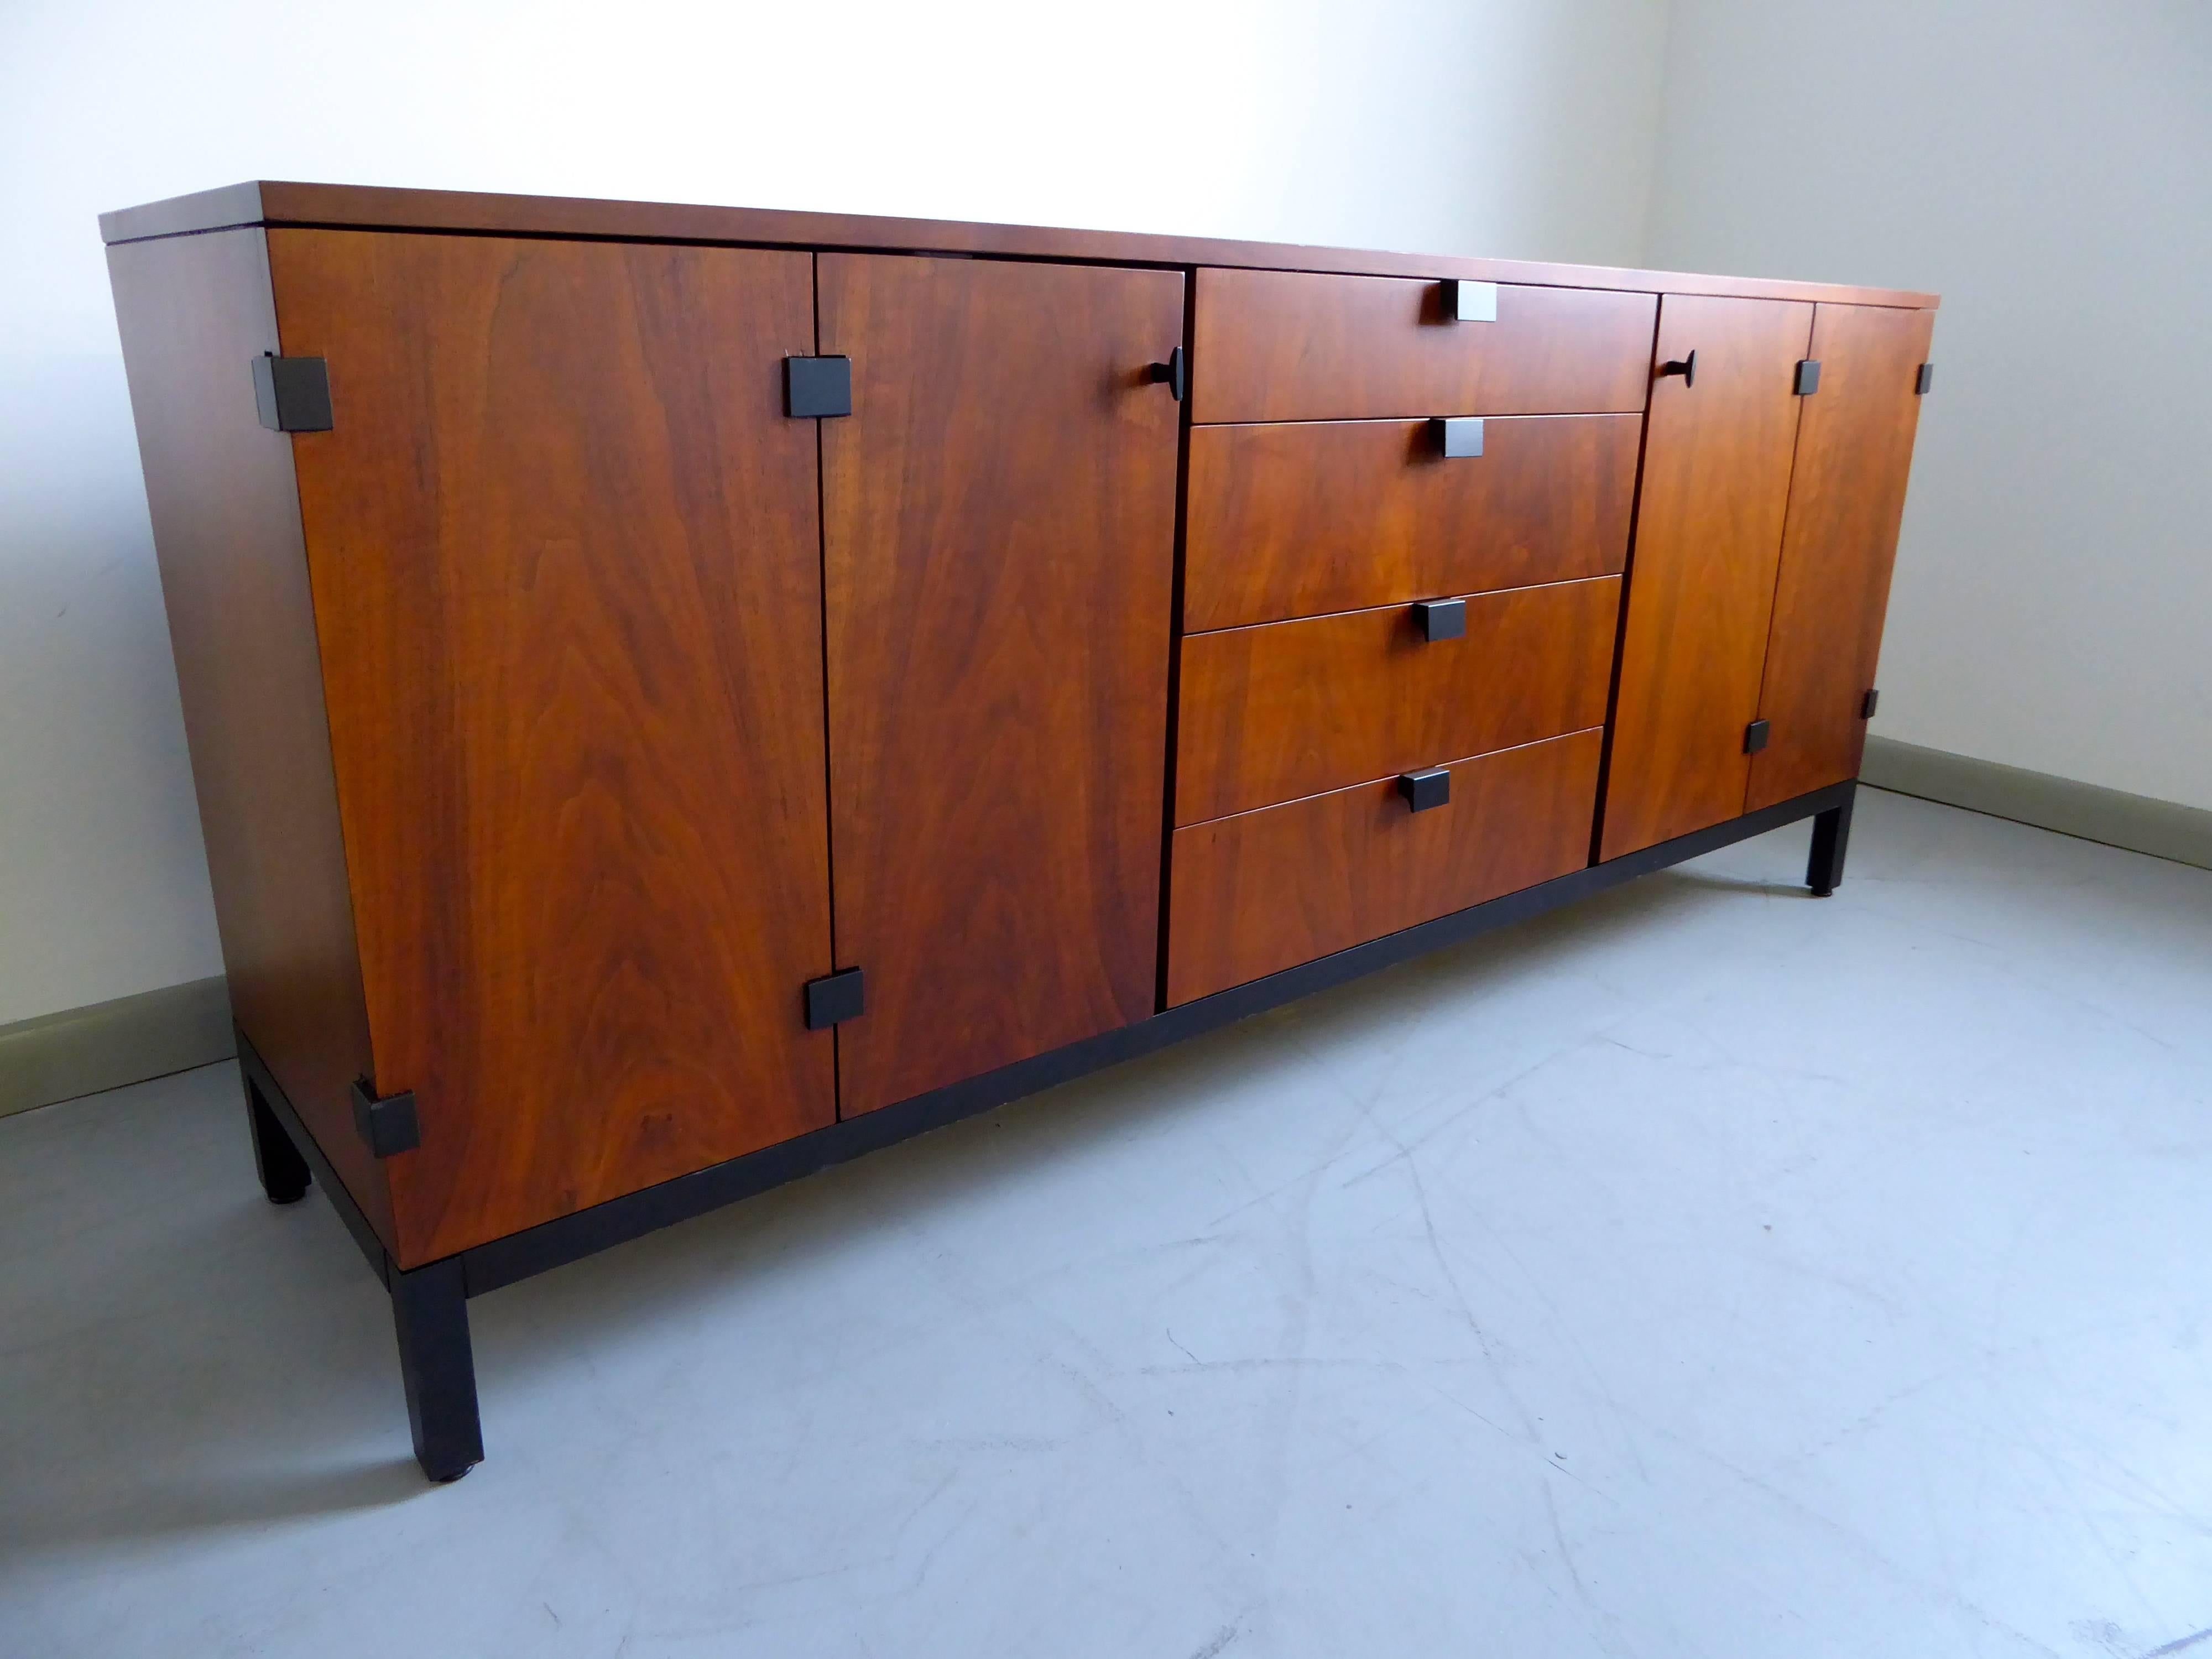 Rare and incredible walnut buffet or credenza by Milo Baughman for Directional, 1960s. Features four center drawers and two cabinets with bi-fold doors. Ebonized wood drawer pulls and metal joinery. Newly refinished. 

